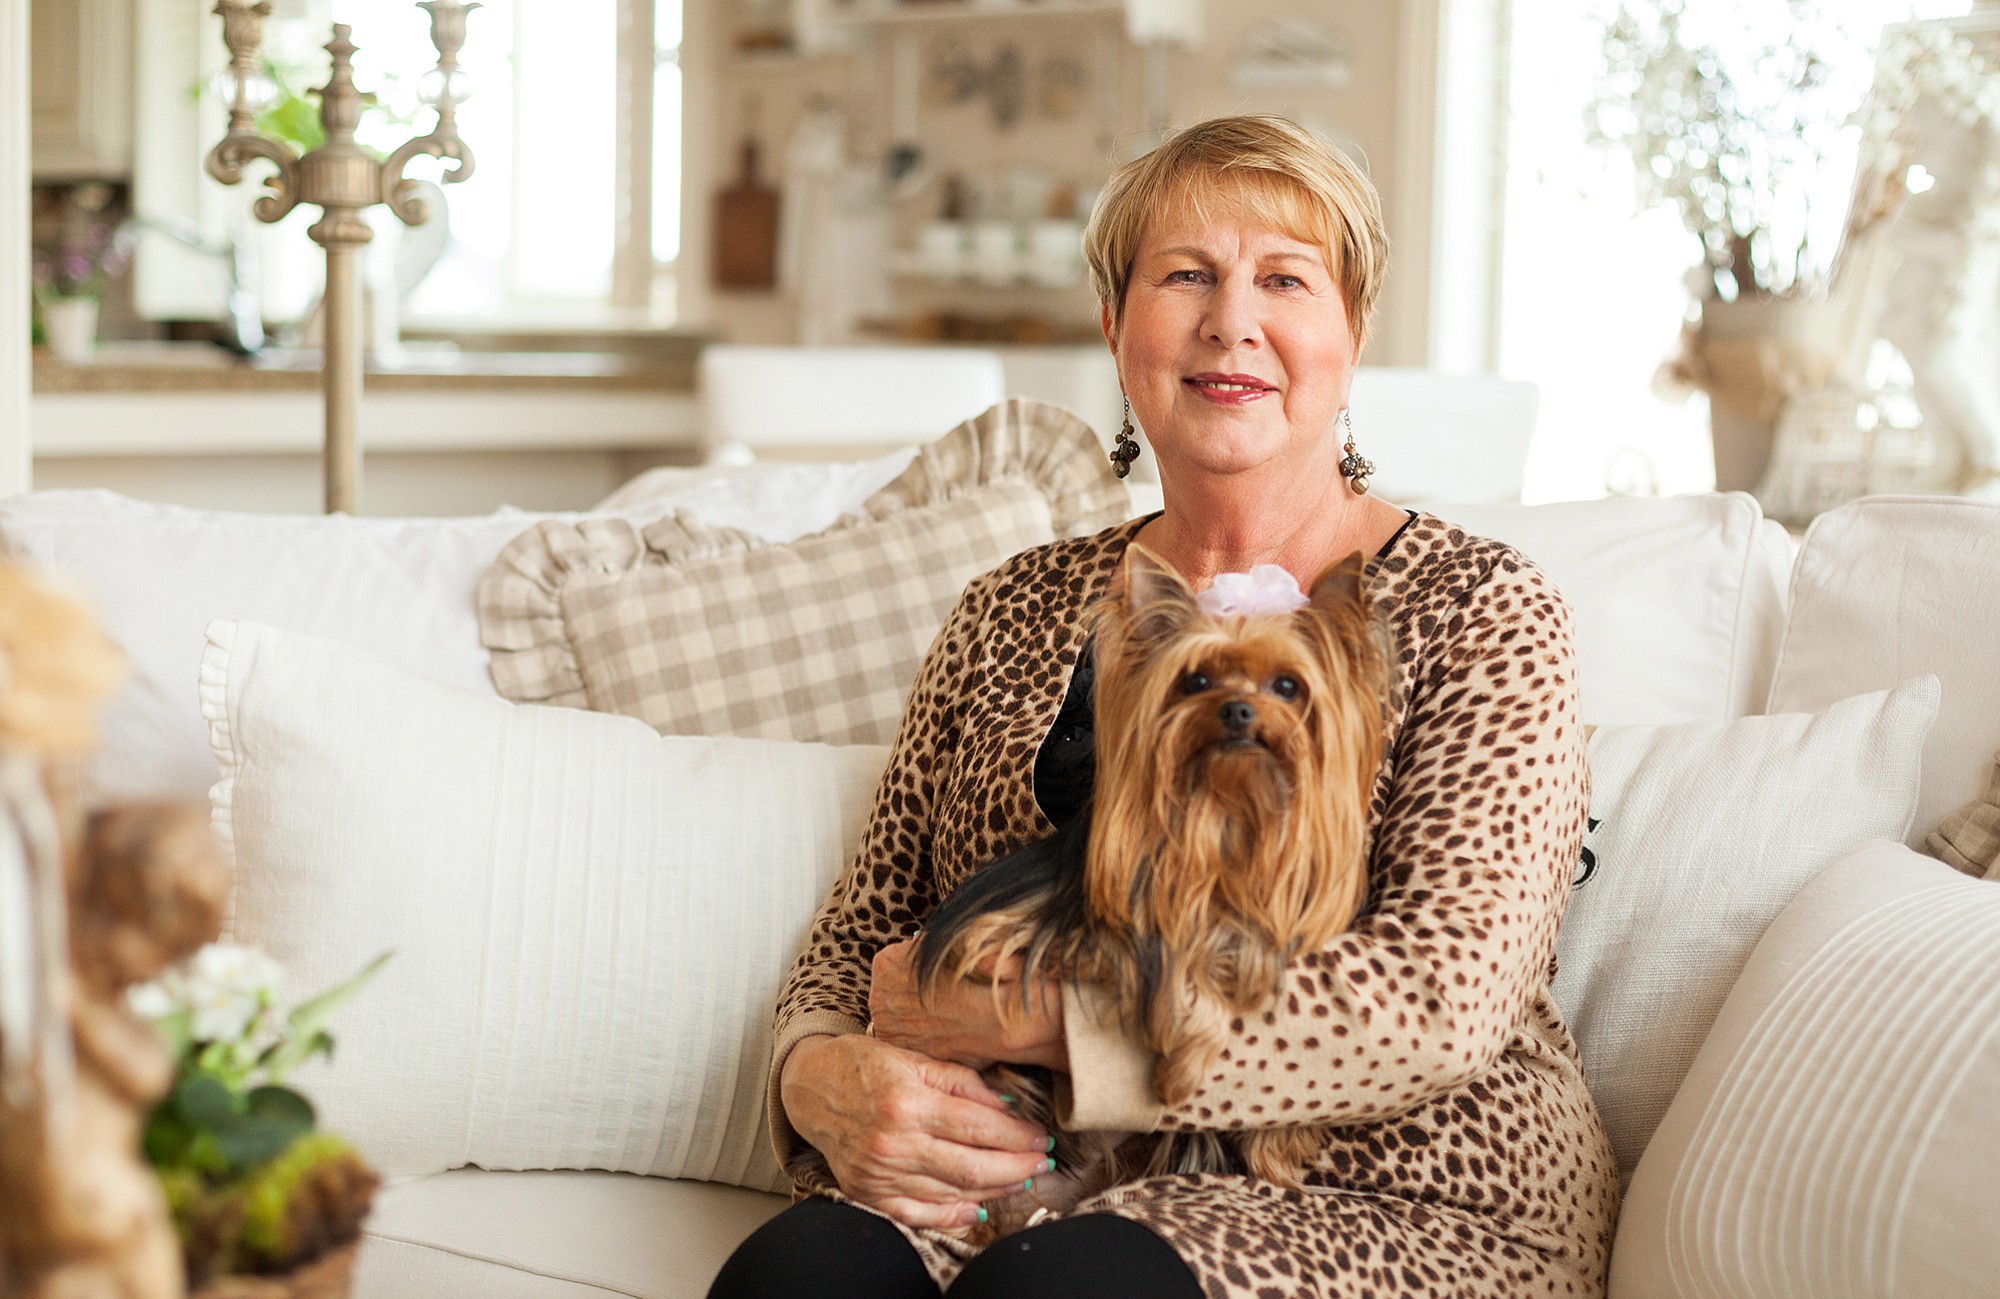 Diane Eskew of Camas, with her Yorkshire terrier Lizzy, has a passion for decorating, with her interior designs featured in home style magazines.